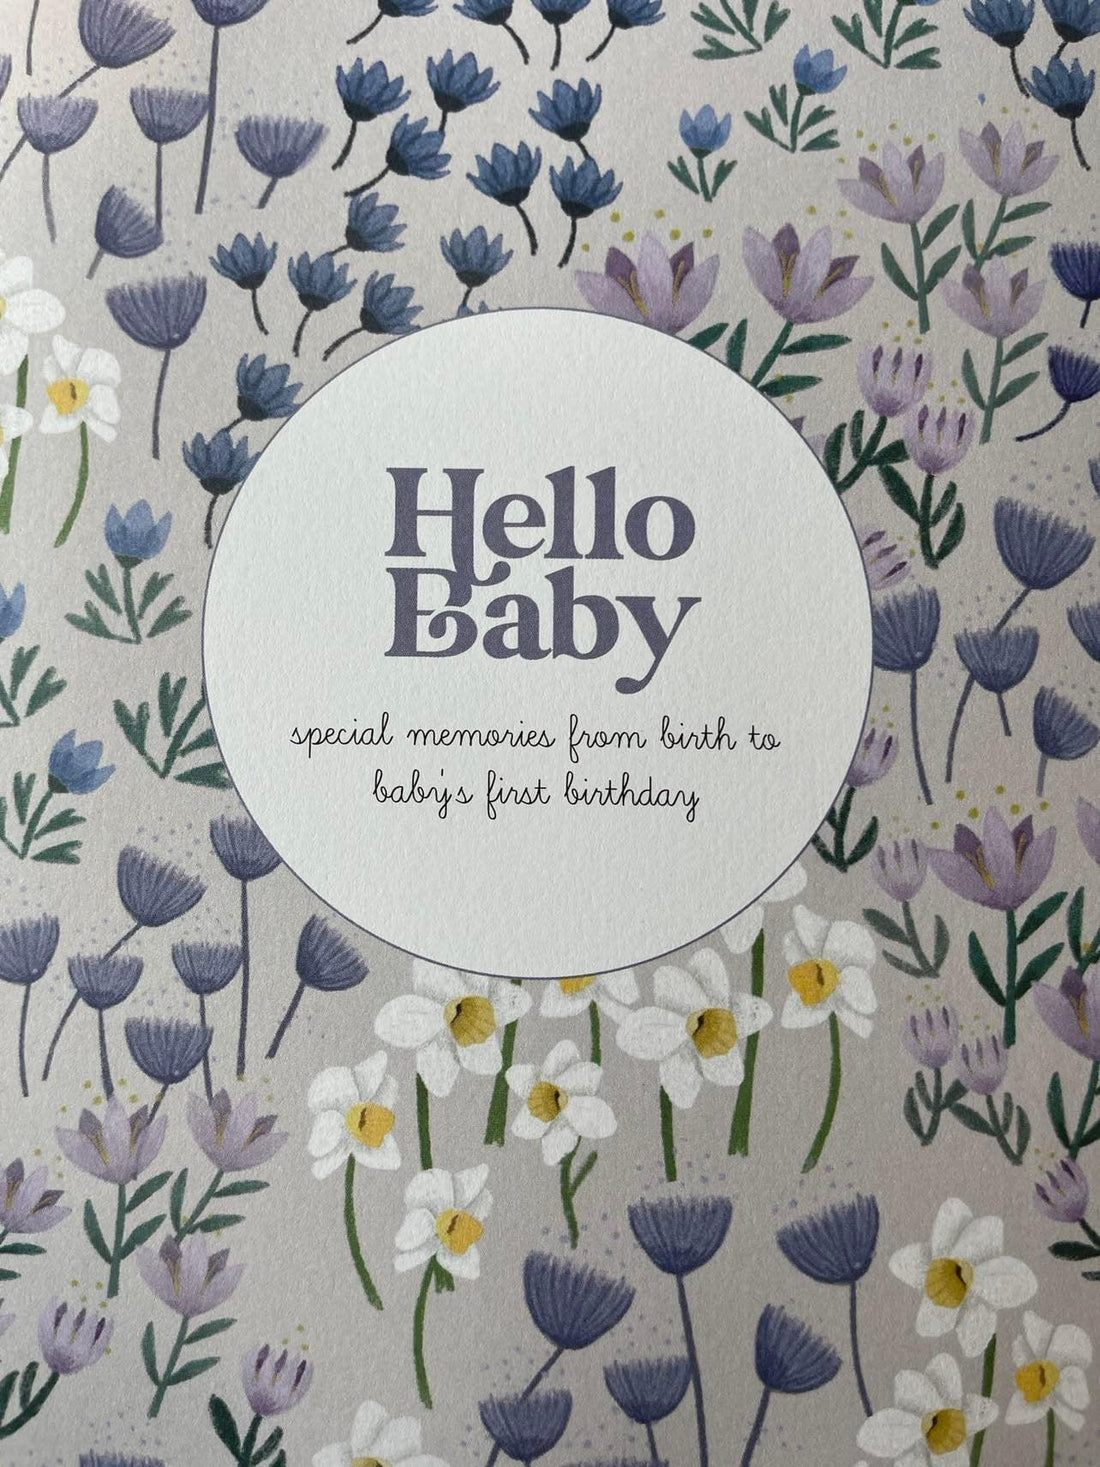 Hello Baby! Special Memories Booklet for new parents - Yoho Baby & co.